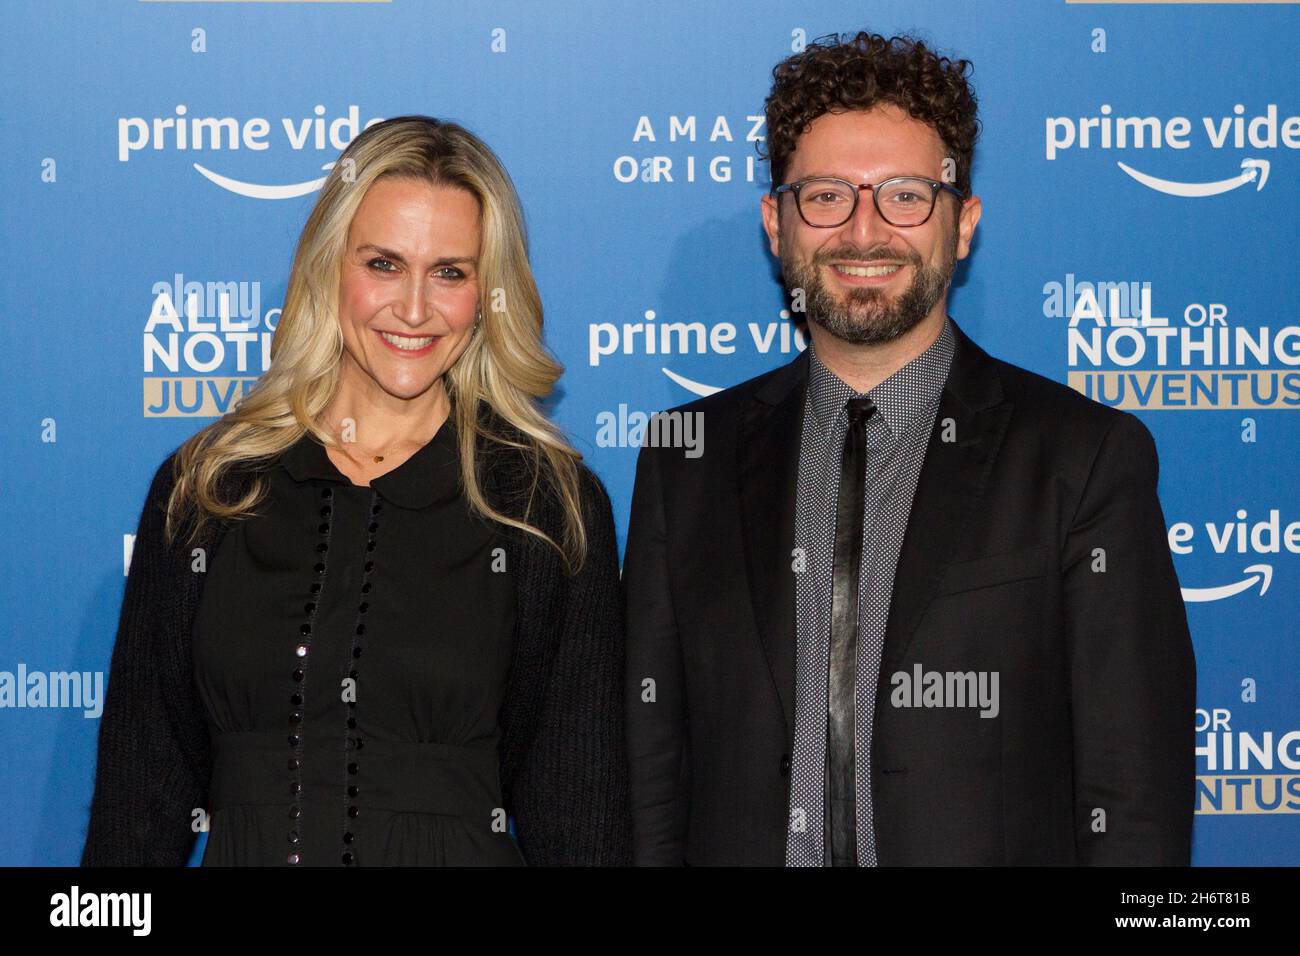 Torino, Italy. 17th November 2021. Nicole Morganti (left) and Dante Sollazzo (right) of Amazon Studios are guests of the presentation of 'All or Nothing: Juventus”.   Juventus Football Club and Amazon Prime Video presented 'All or Nothing: Juventus”, a sports documentary series produced and distributed by Amazon that documents sport clubs behind the scenes. “All or Nothing: Juventus” was filmed during the 2020-2021 Football season and will be aired from the 25th of November 2021. Stock Photo